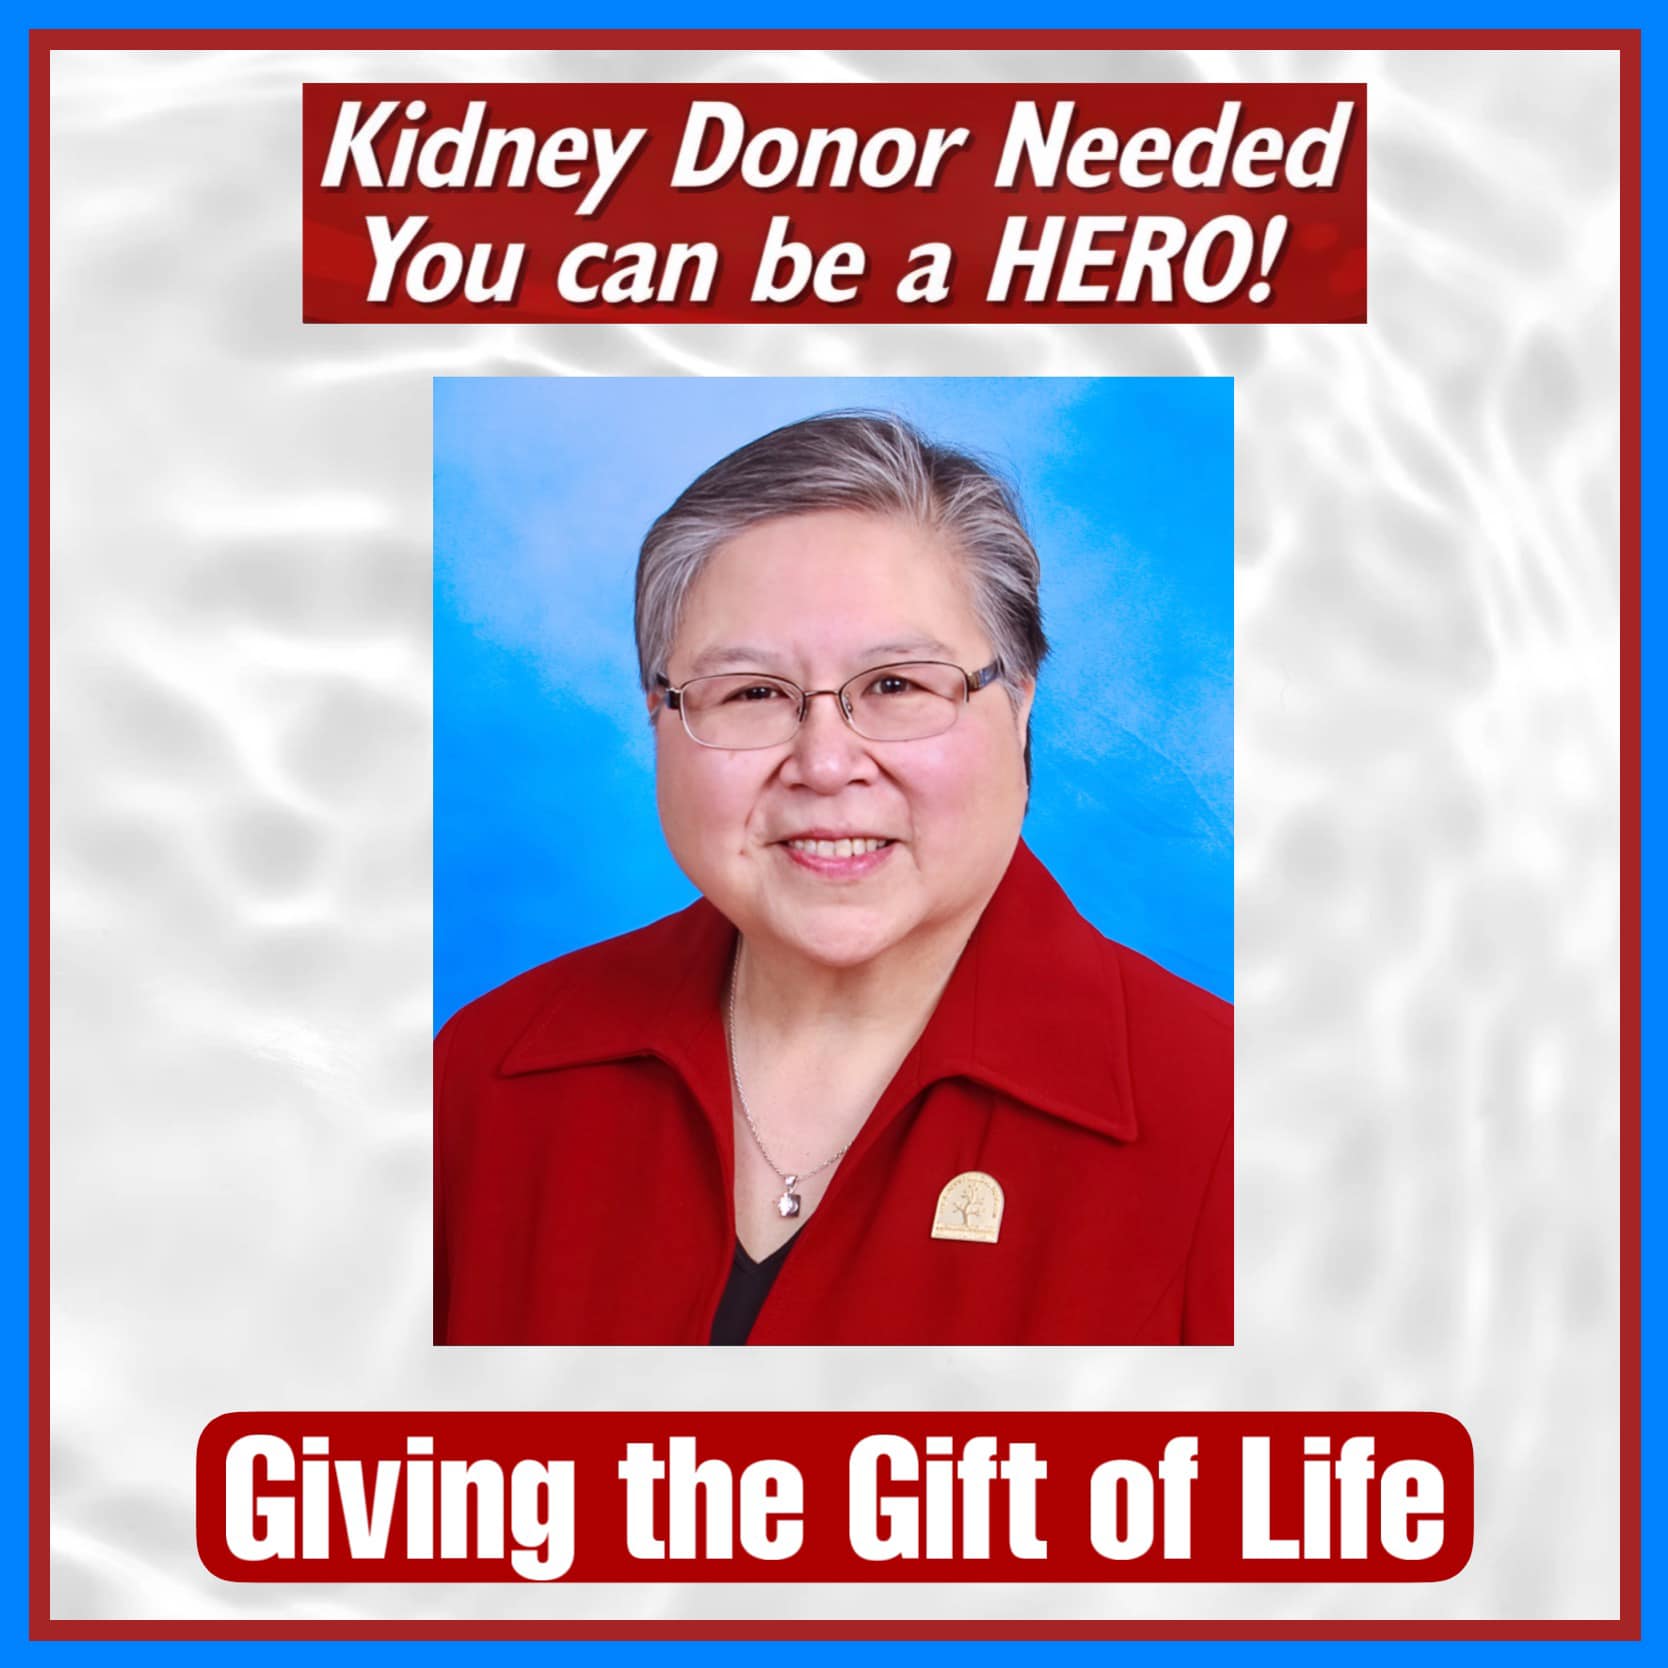 Kindey Donor Needed - You Can be a HERO - Lily Woo.jpg